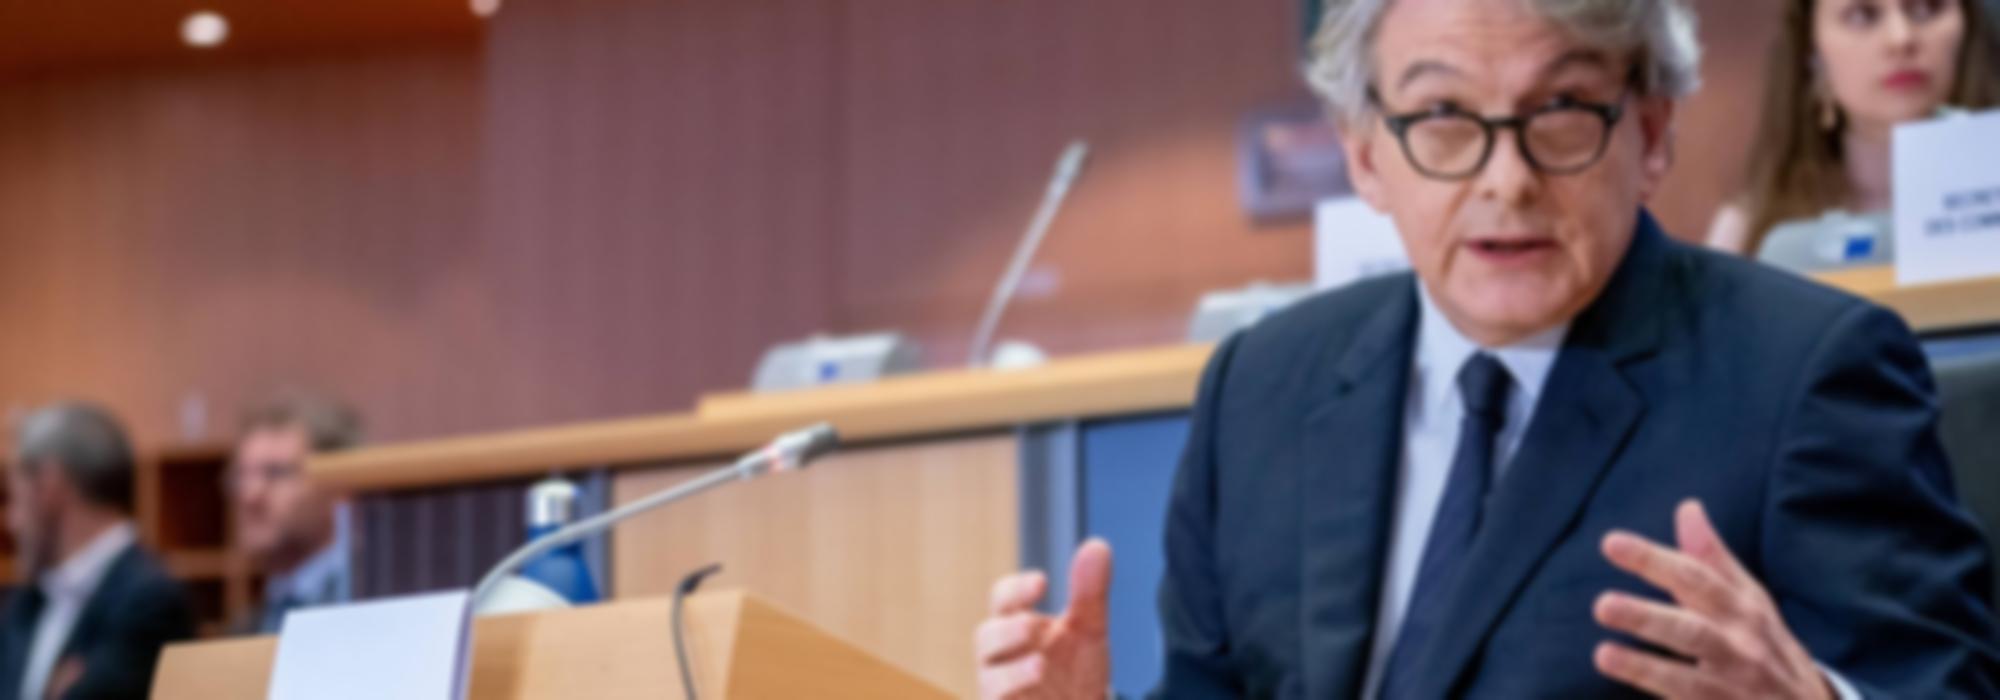 Thierry Breton in het Europees Parlement. foto: European Parliament from EU [CC BY 2.0]